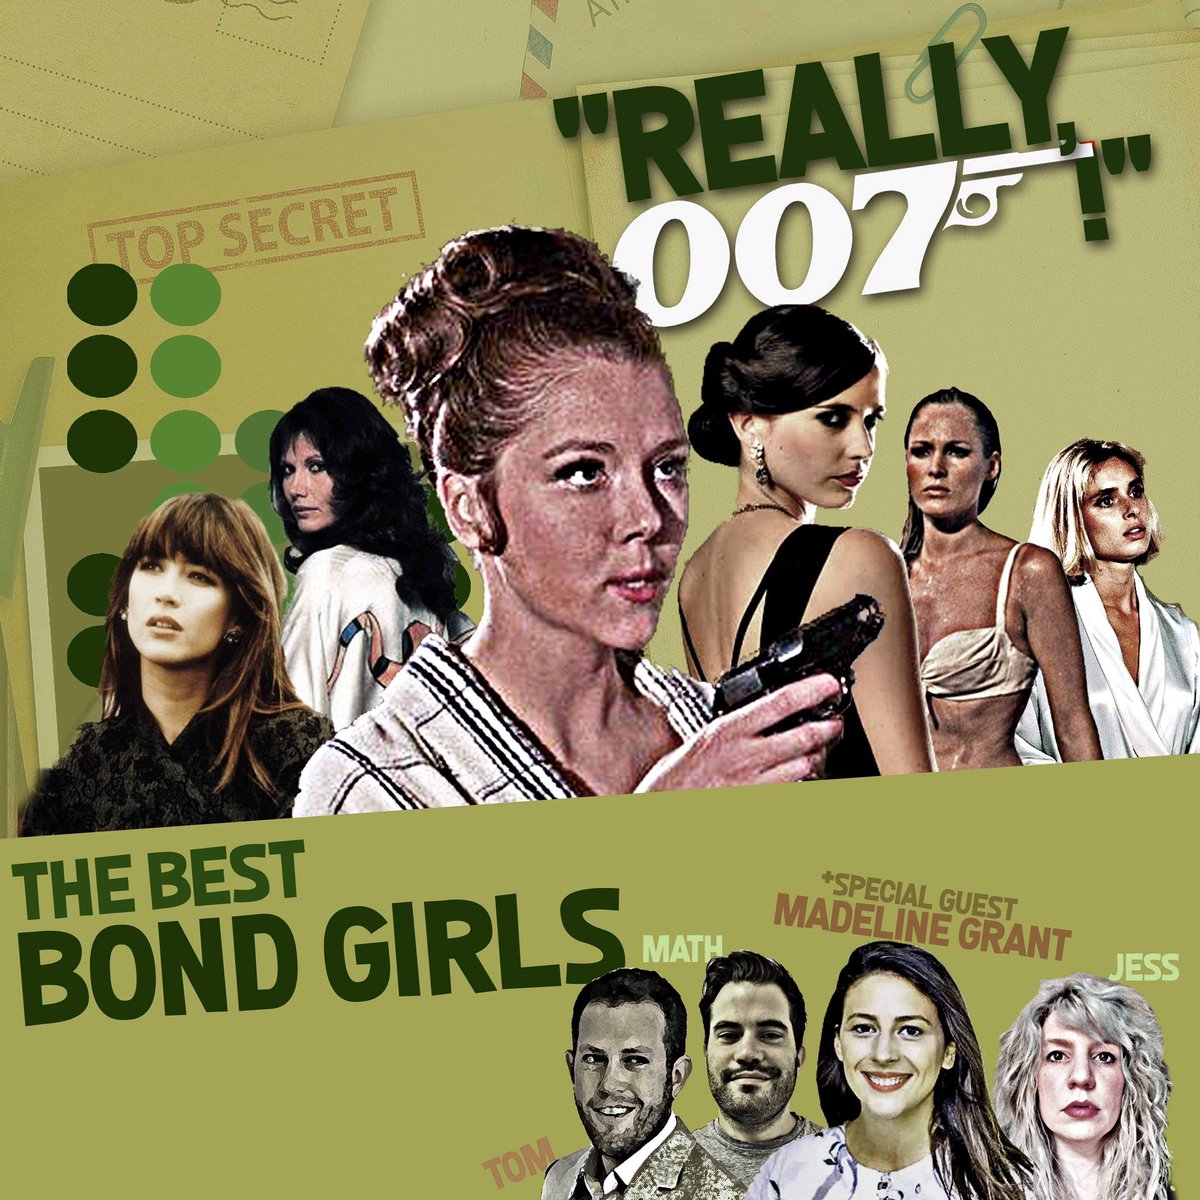 Really007pod tweet picture